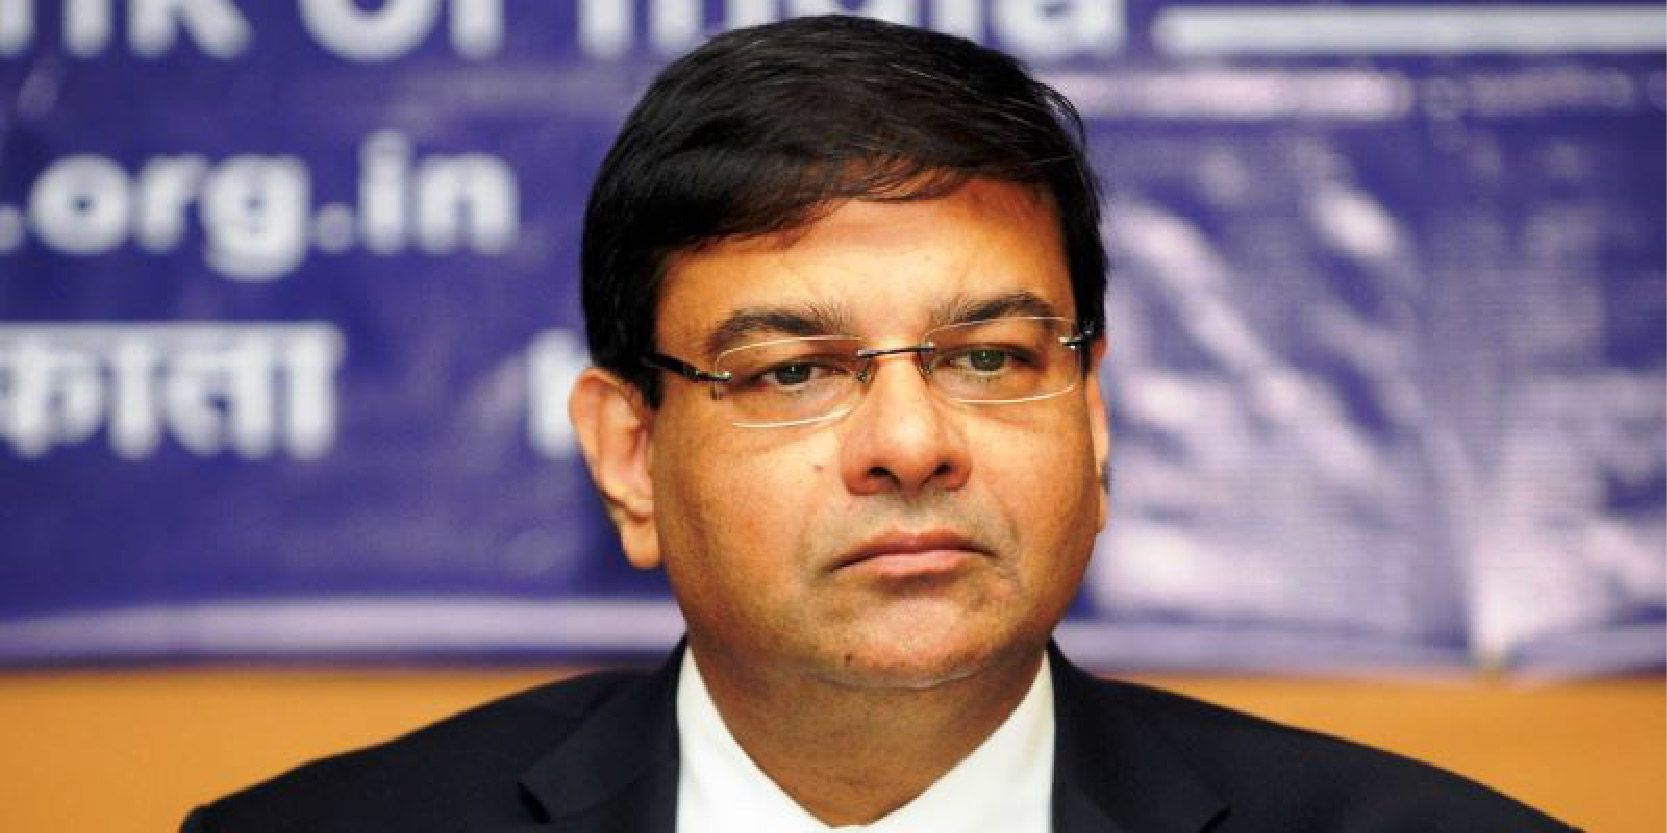 RBI sees economy growing at 7.4% in 2017-18